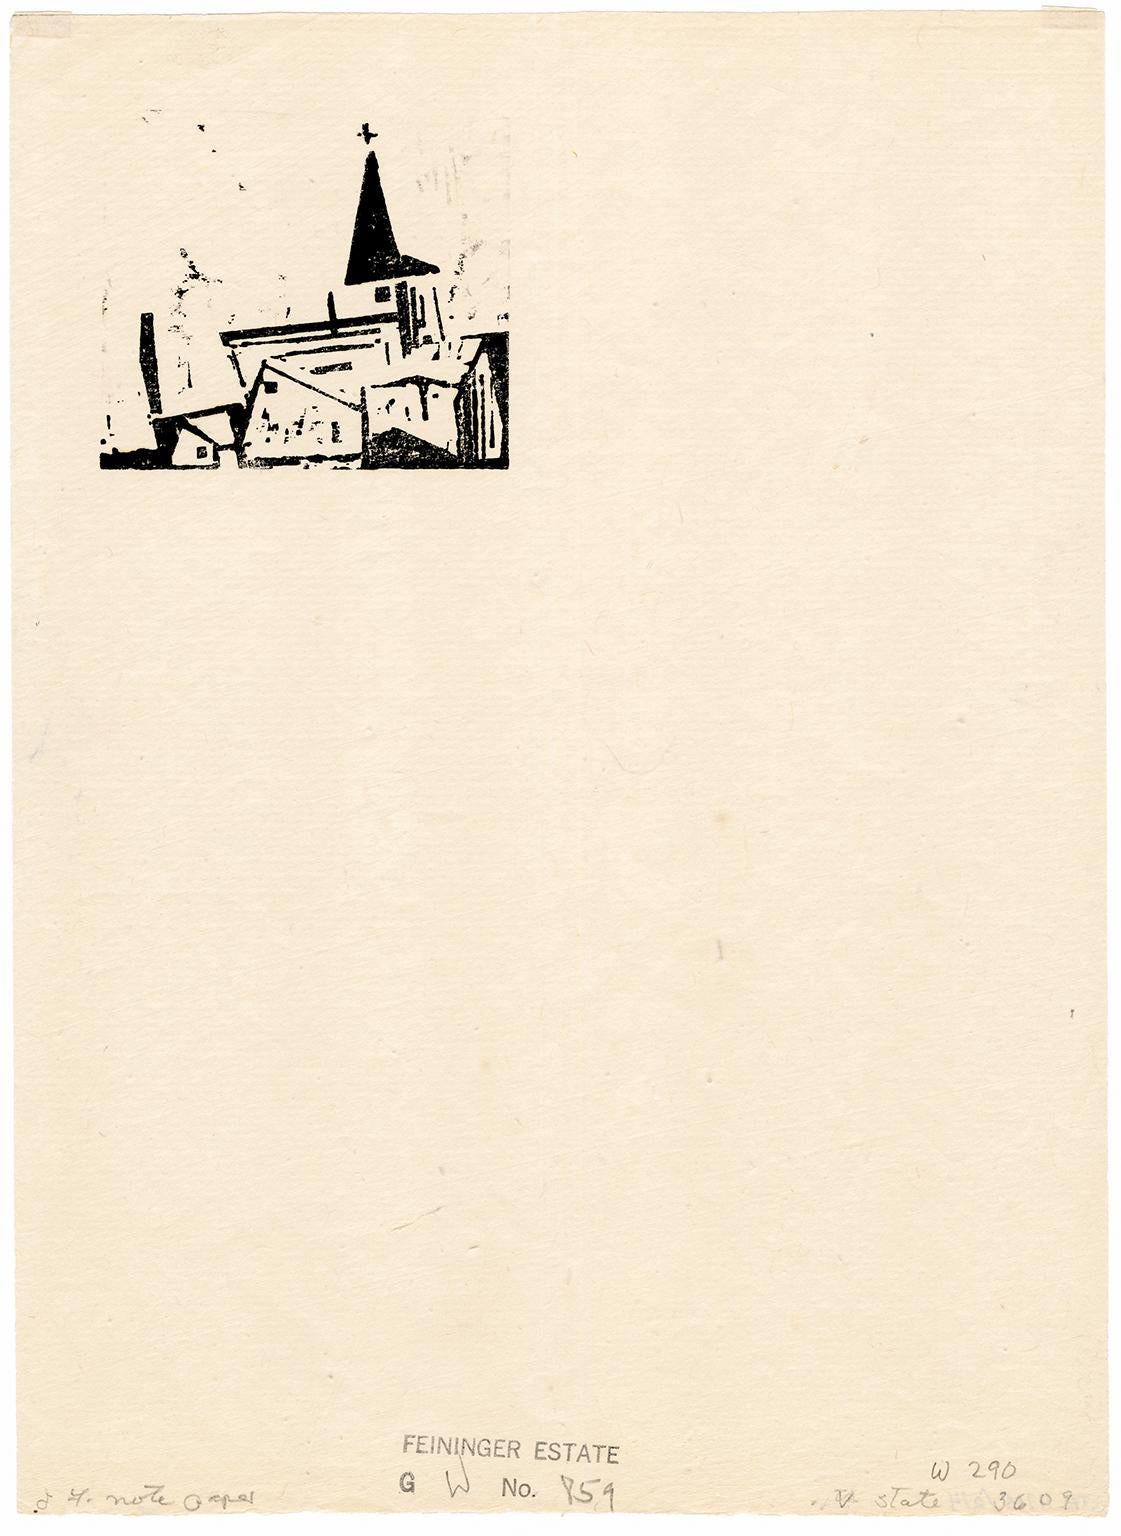 'Church with House and Tree' – Artist's Personal Letterhead, Bauhaus Modernism - Print by Lyonel Feininger